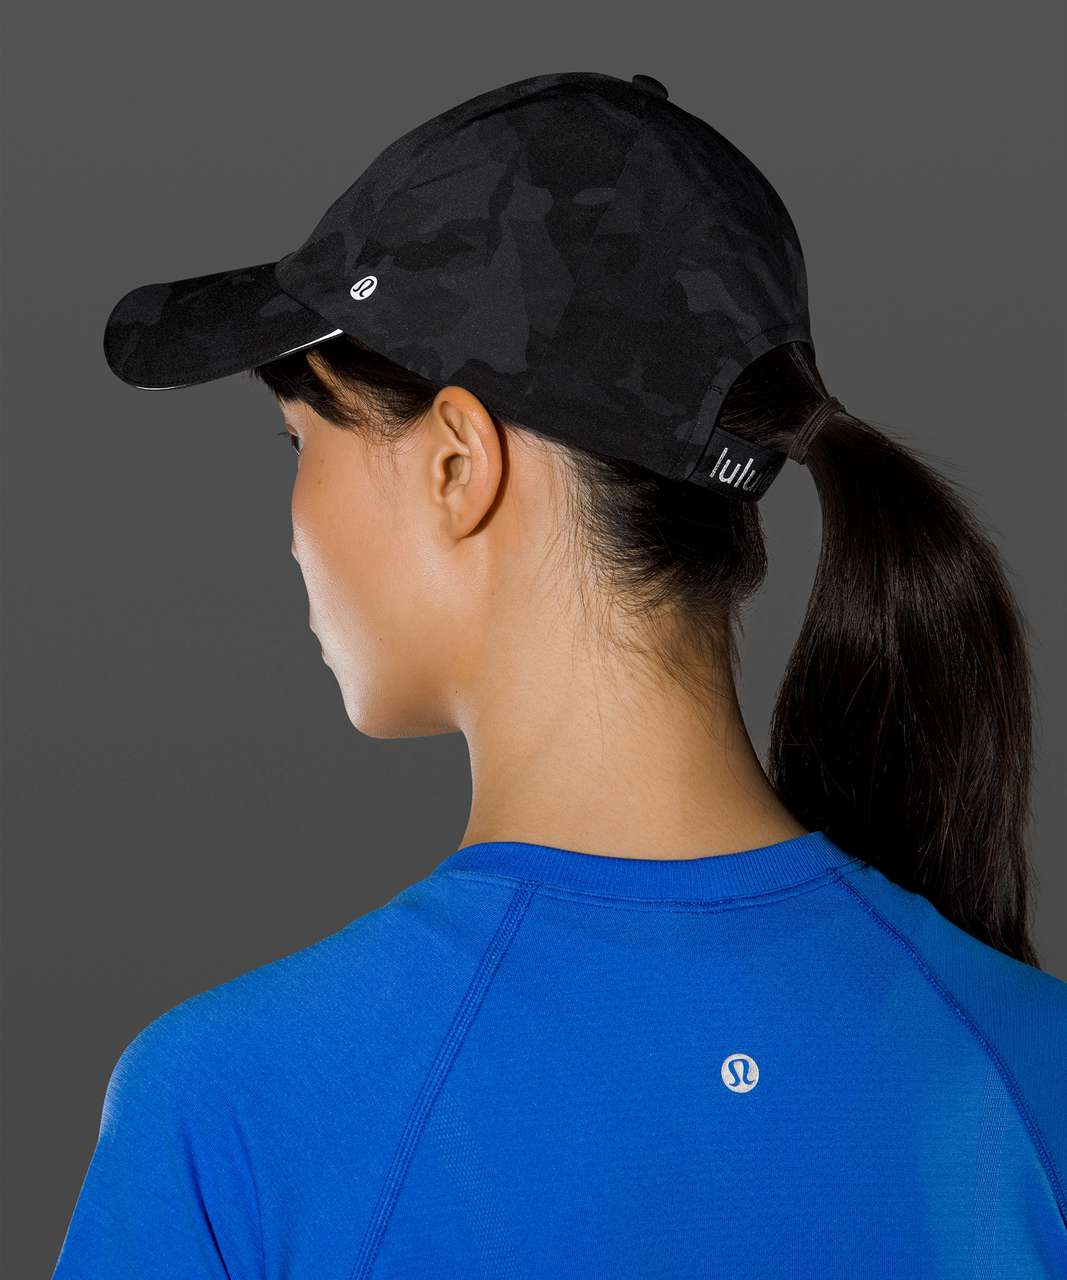 Lululemon Fast and Free Womens Run Hat - Incognito Camo Multi Grey 